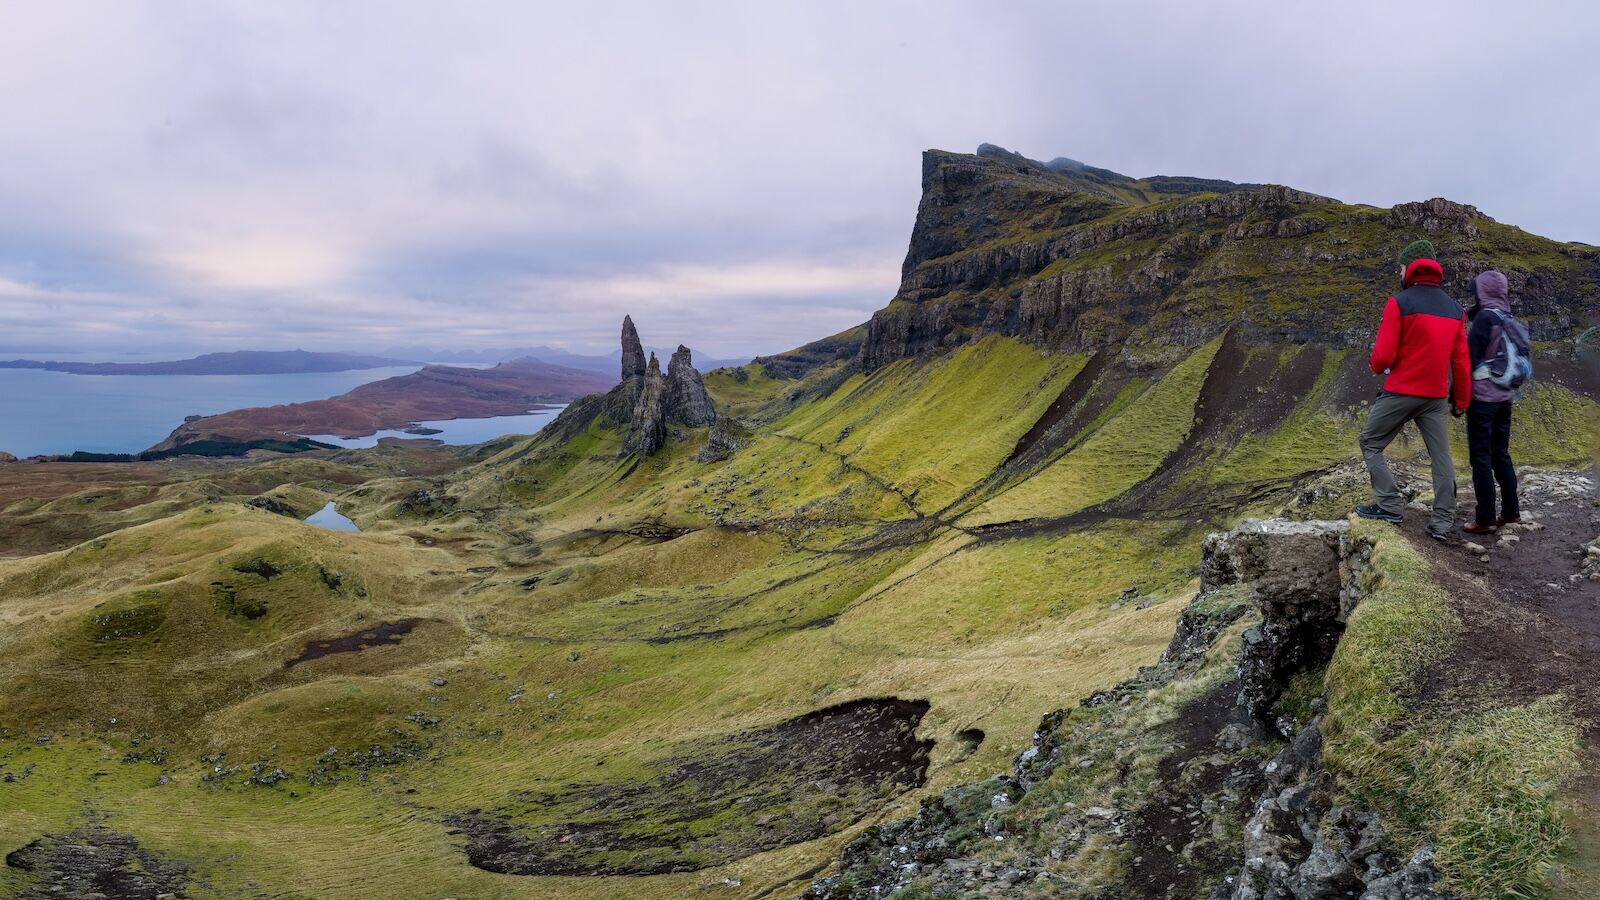 Couple hand in hand in rugged volcanic landscape around Old Man of Storr, Isle of Skye, Scotland